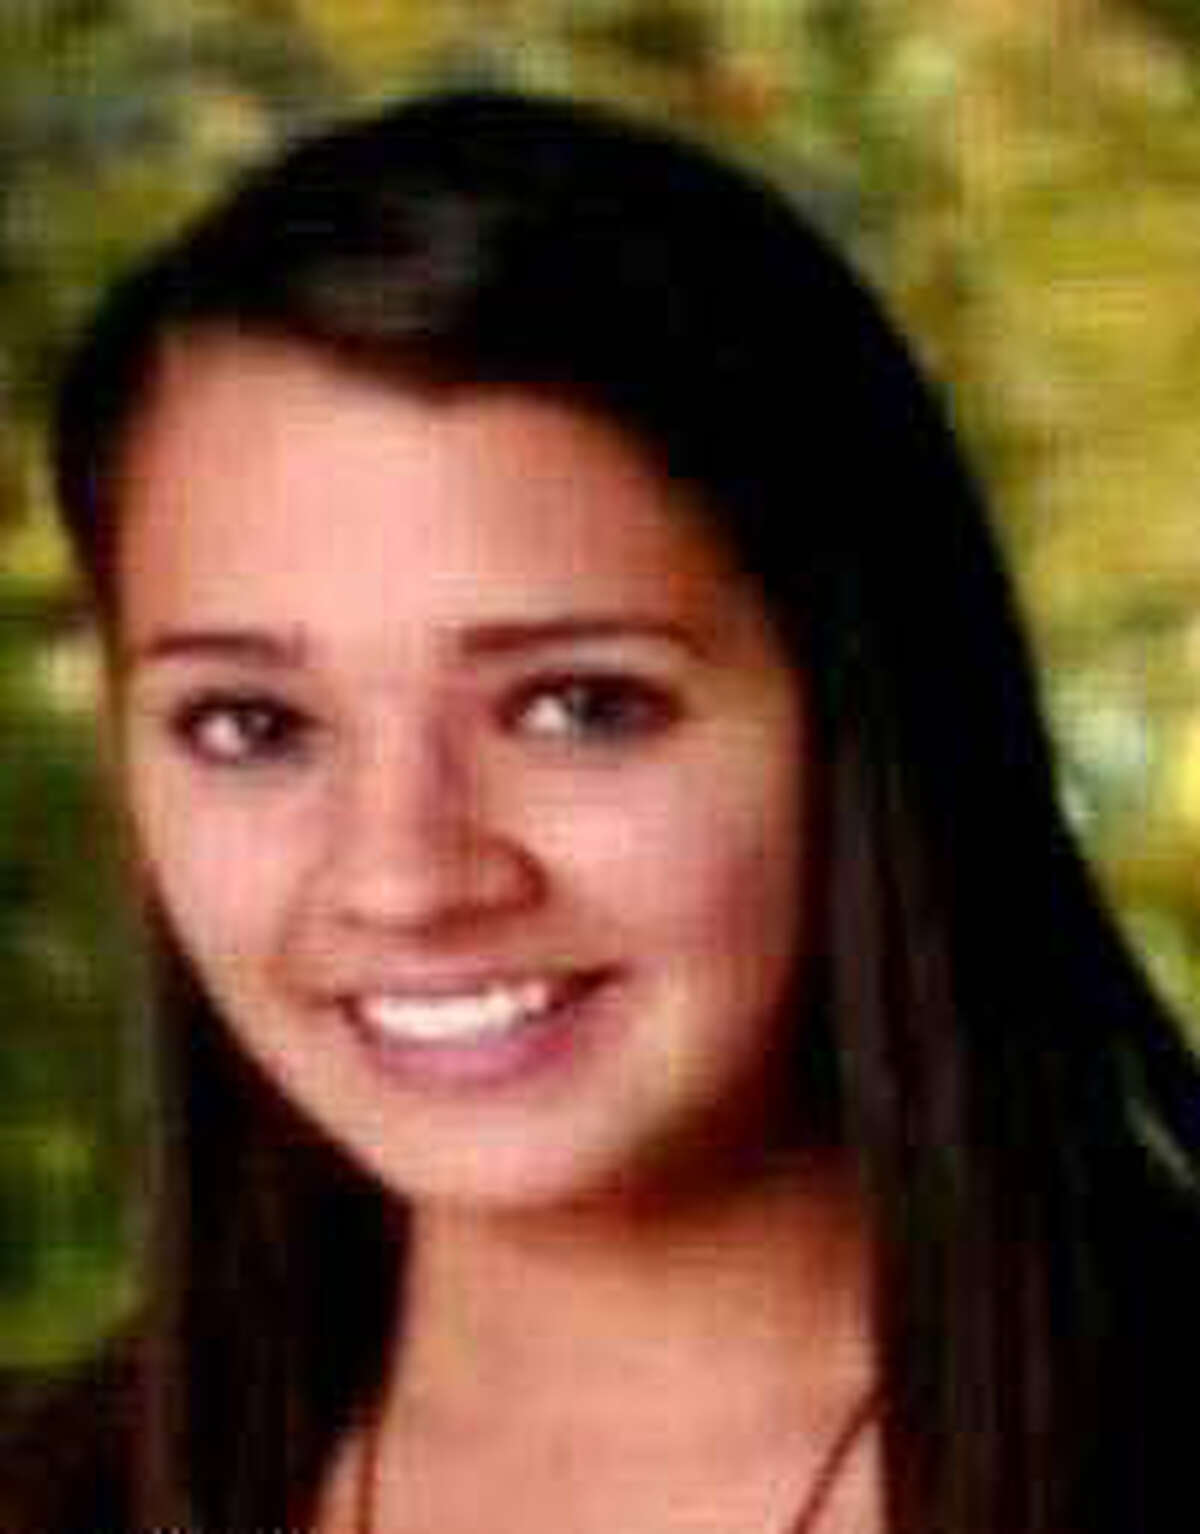 Victoria Soto a victim in the Sandy Hook Elementary School shooting in Newtown, Conn. Dec. 14, 2012